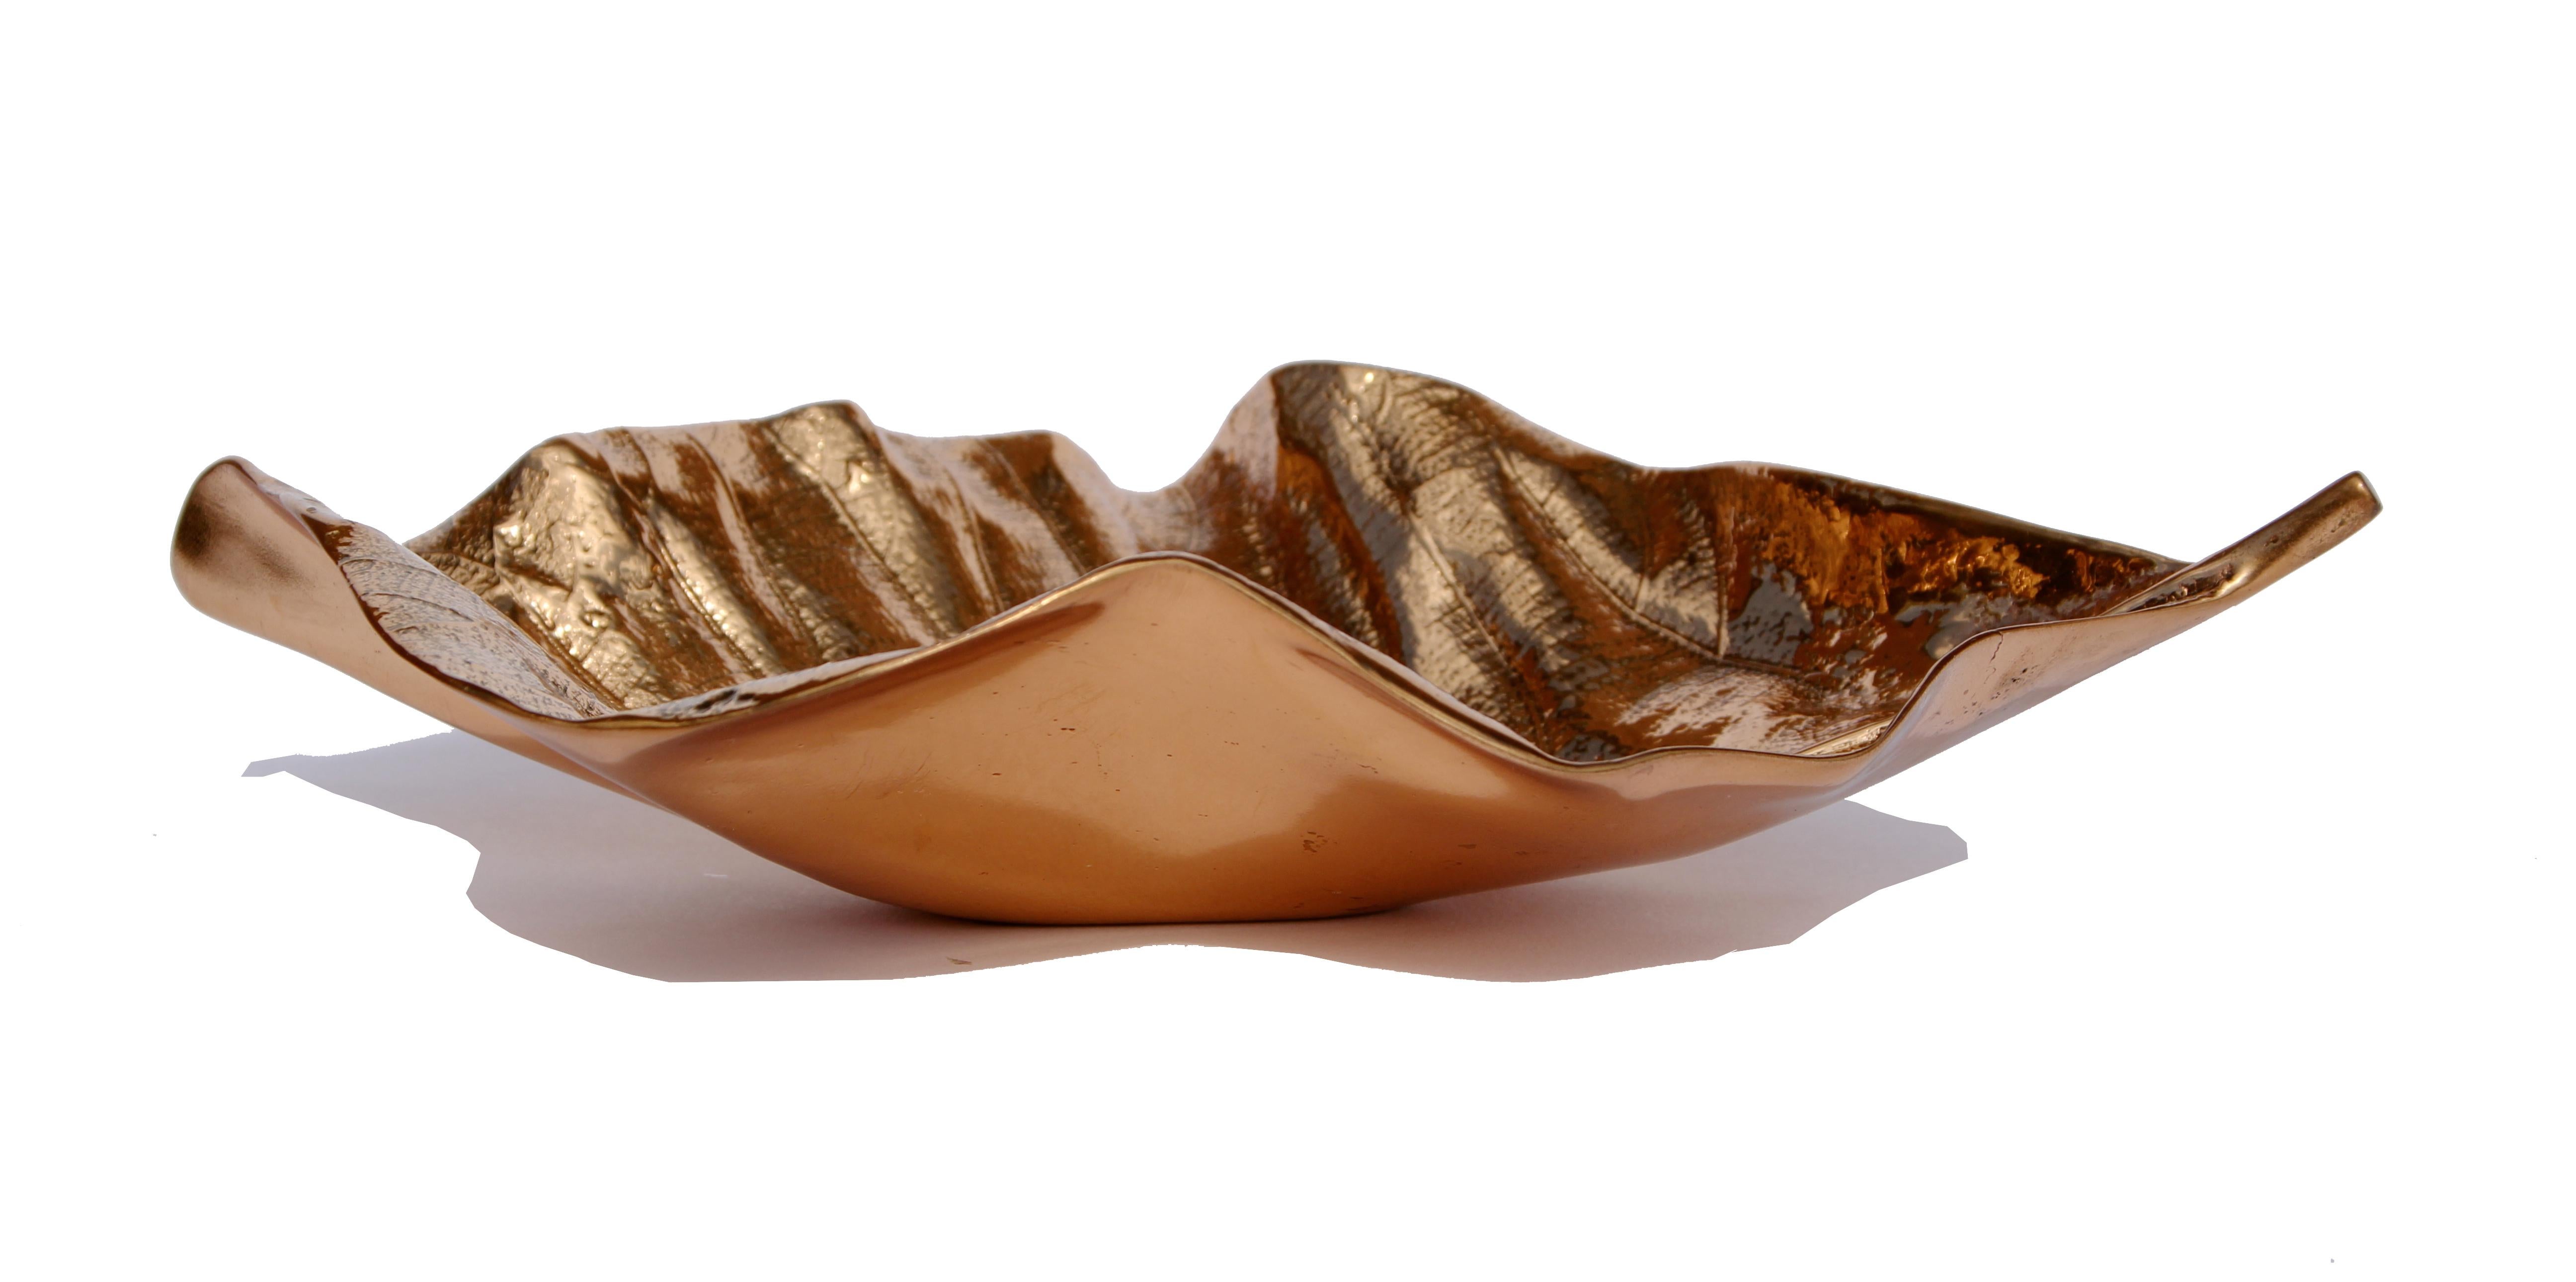 Elegant handmade cast bronze leaf in a polished bronze finish. They may be used as a bowl or just a beautiful decorative object.

Each of these splendid leaves are handmade individually with incredible detail. Cast using very traditional techniques,